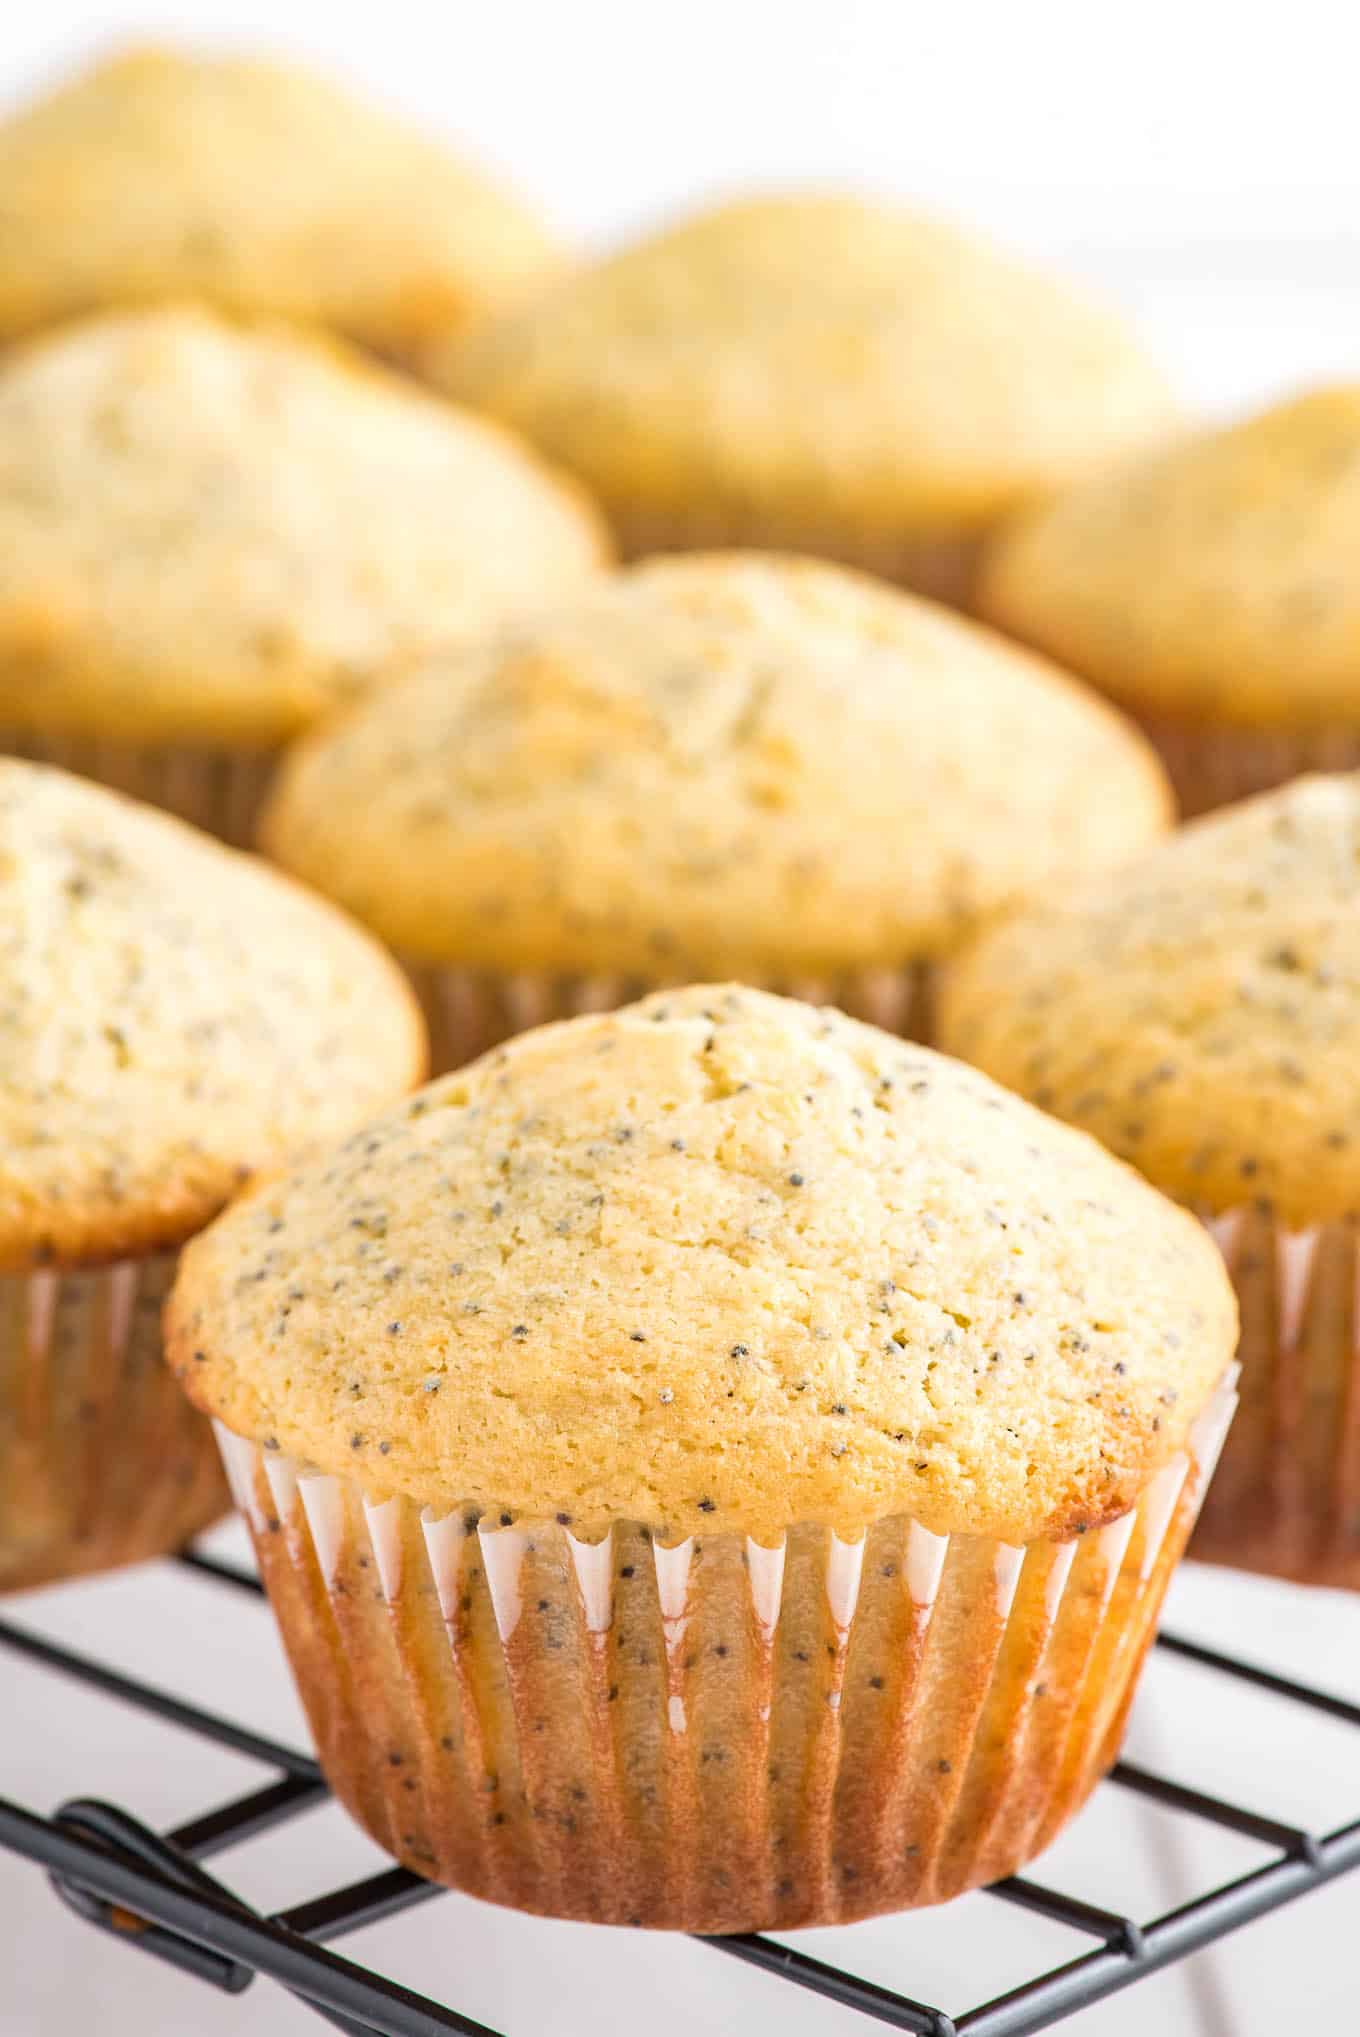 Lemon poppyseed muffins on a baking tray to cool.